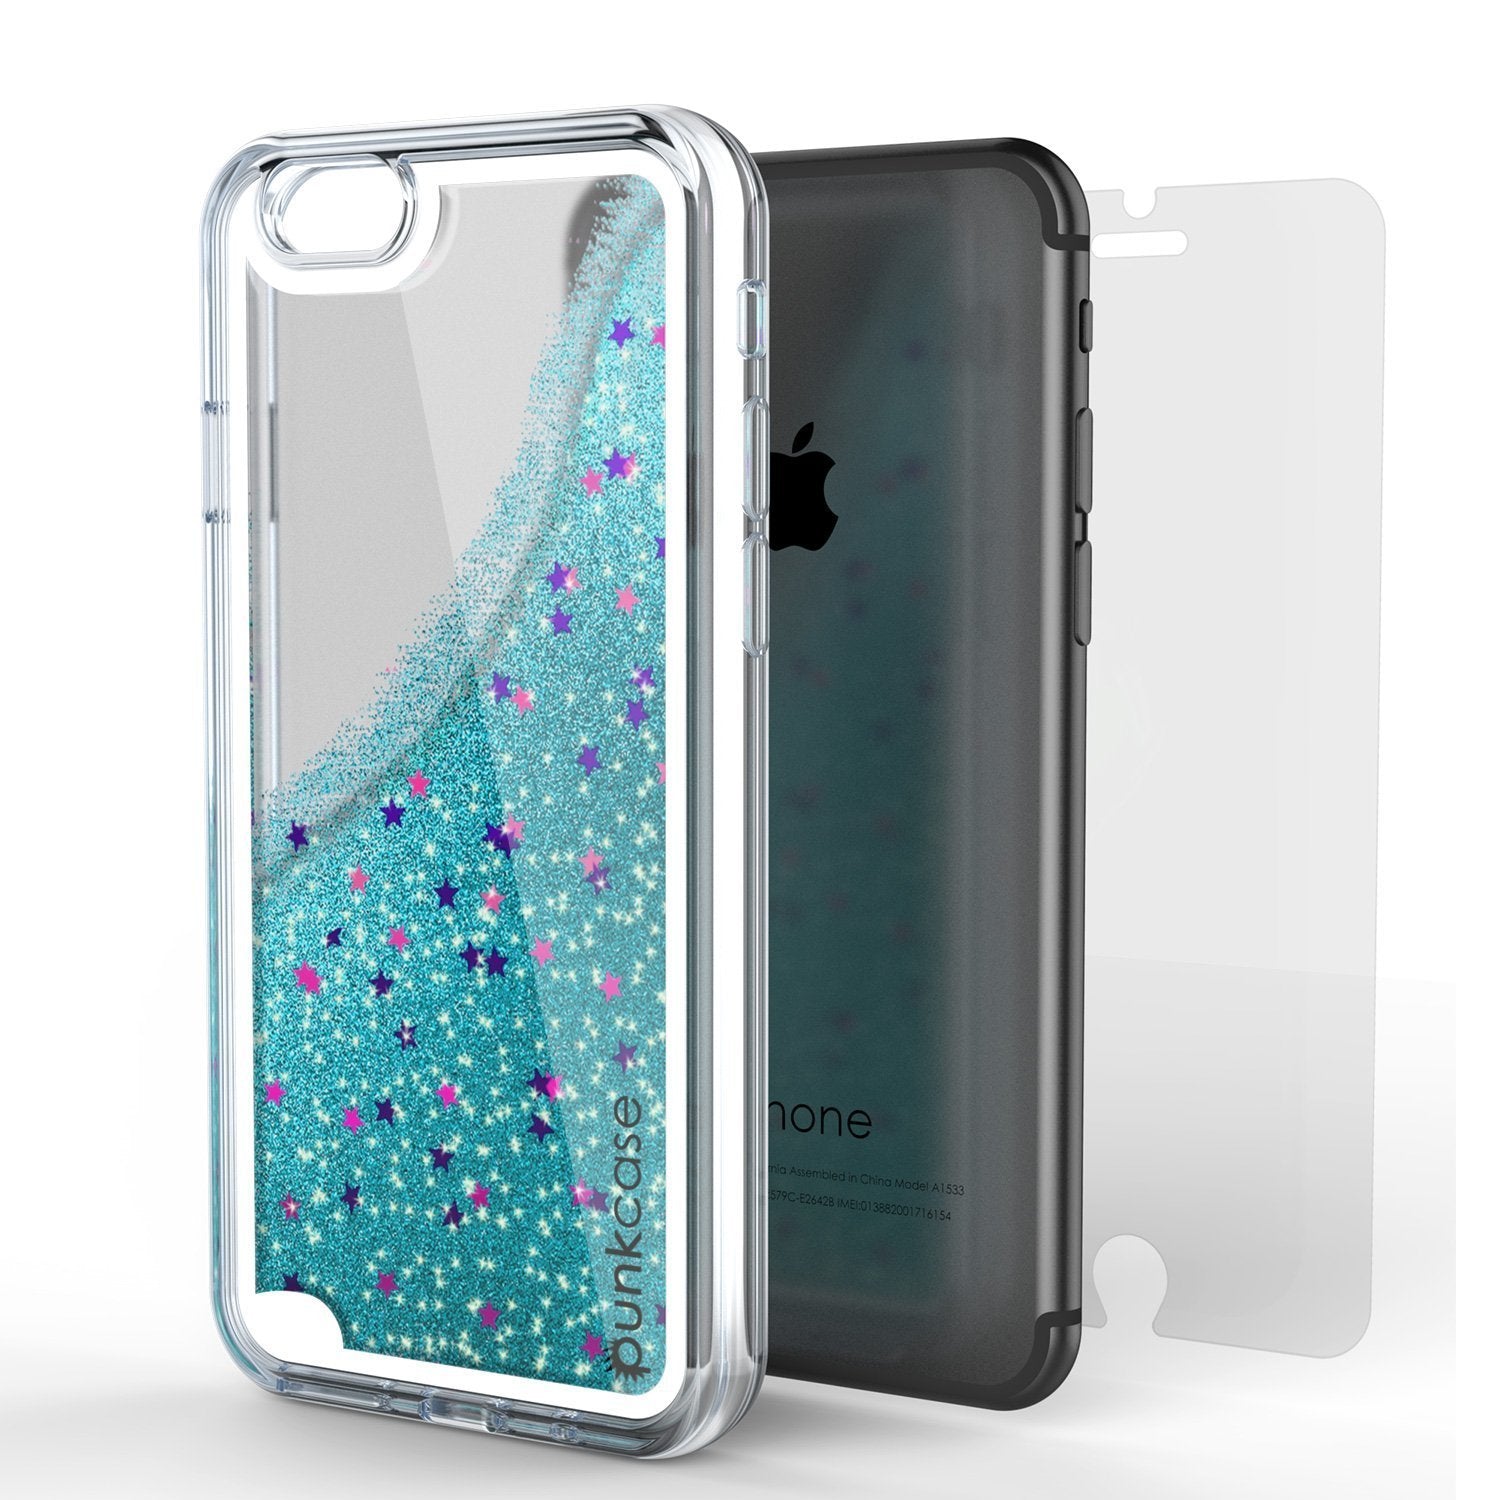 iPhone SE (4.7") Case, PunkCase LIQUID Teal Series, Protective Dual Layer Floating Glitter Cover